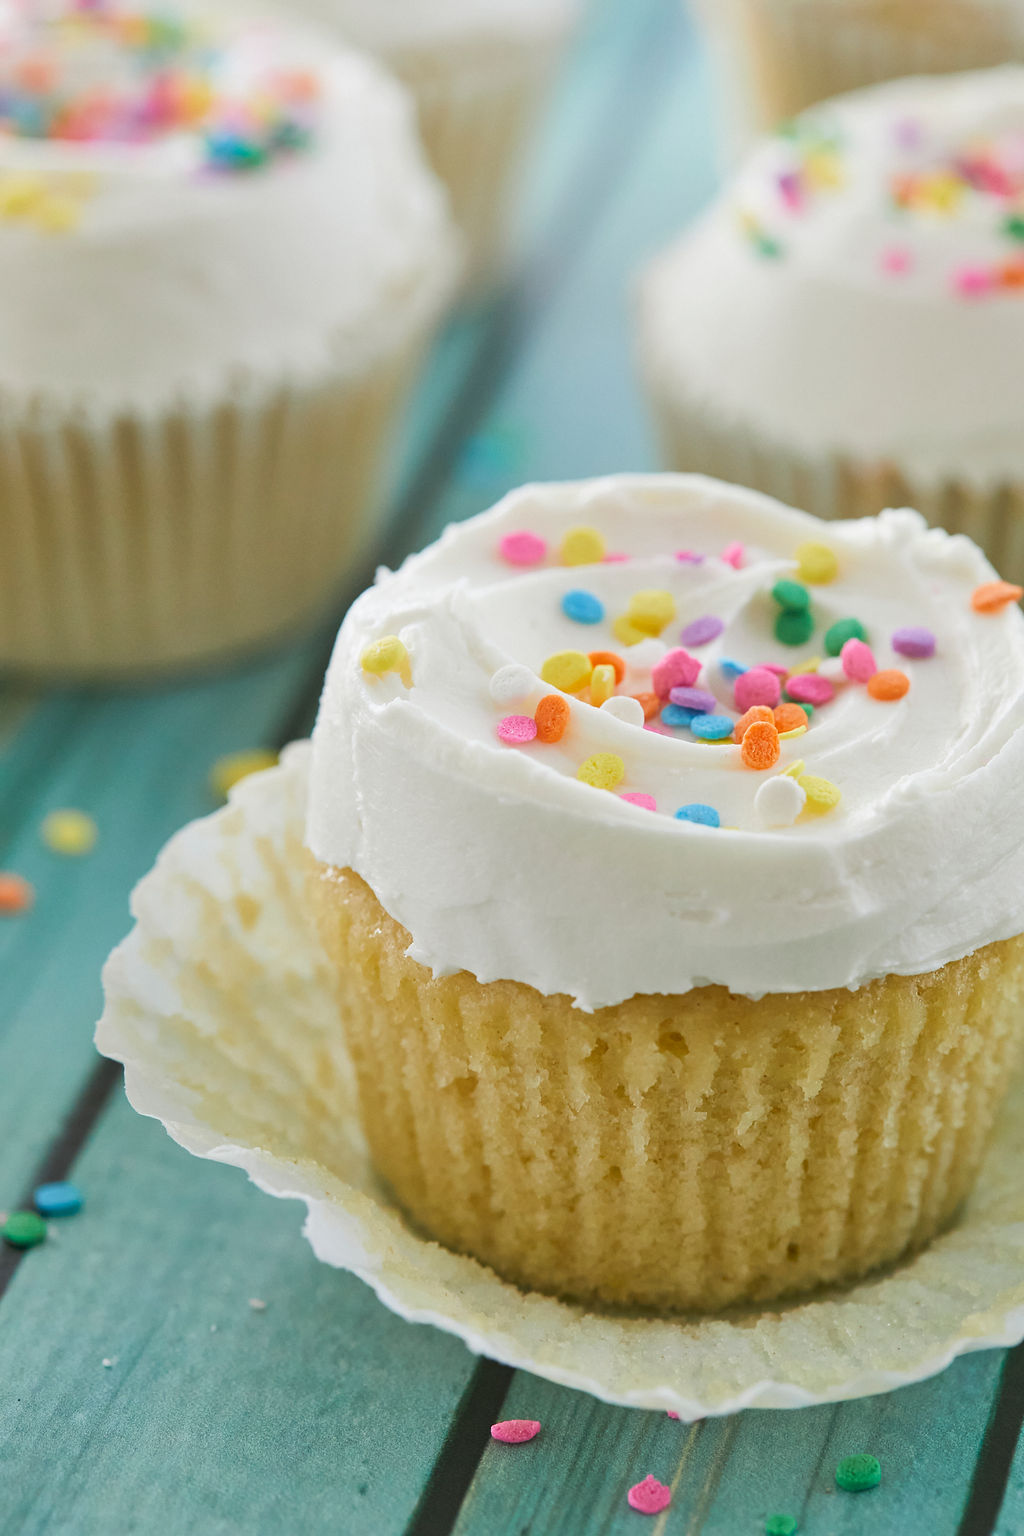 Homemade Vanilla Cupcakes with Best-Ever Buttercream Frosting